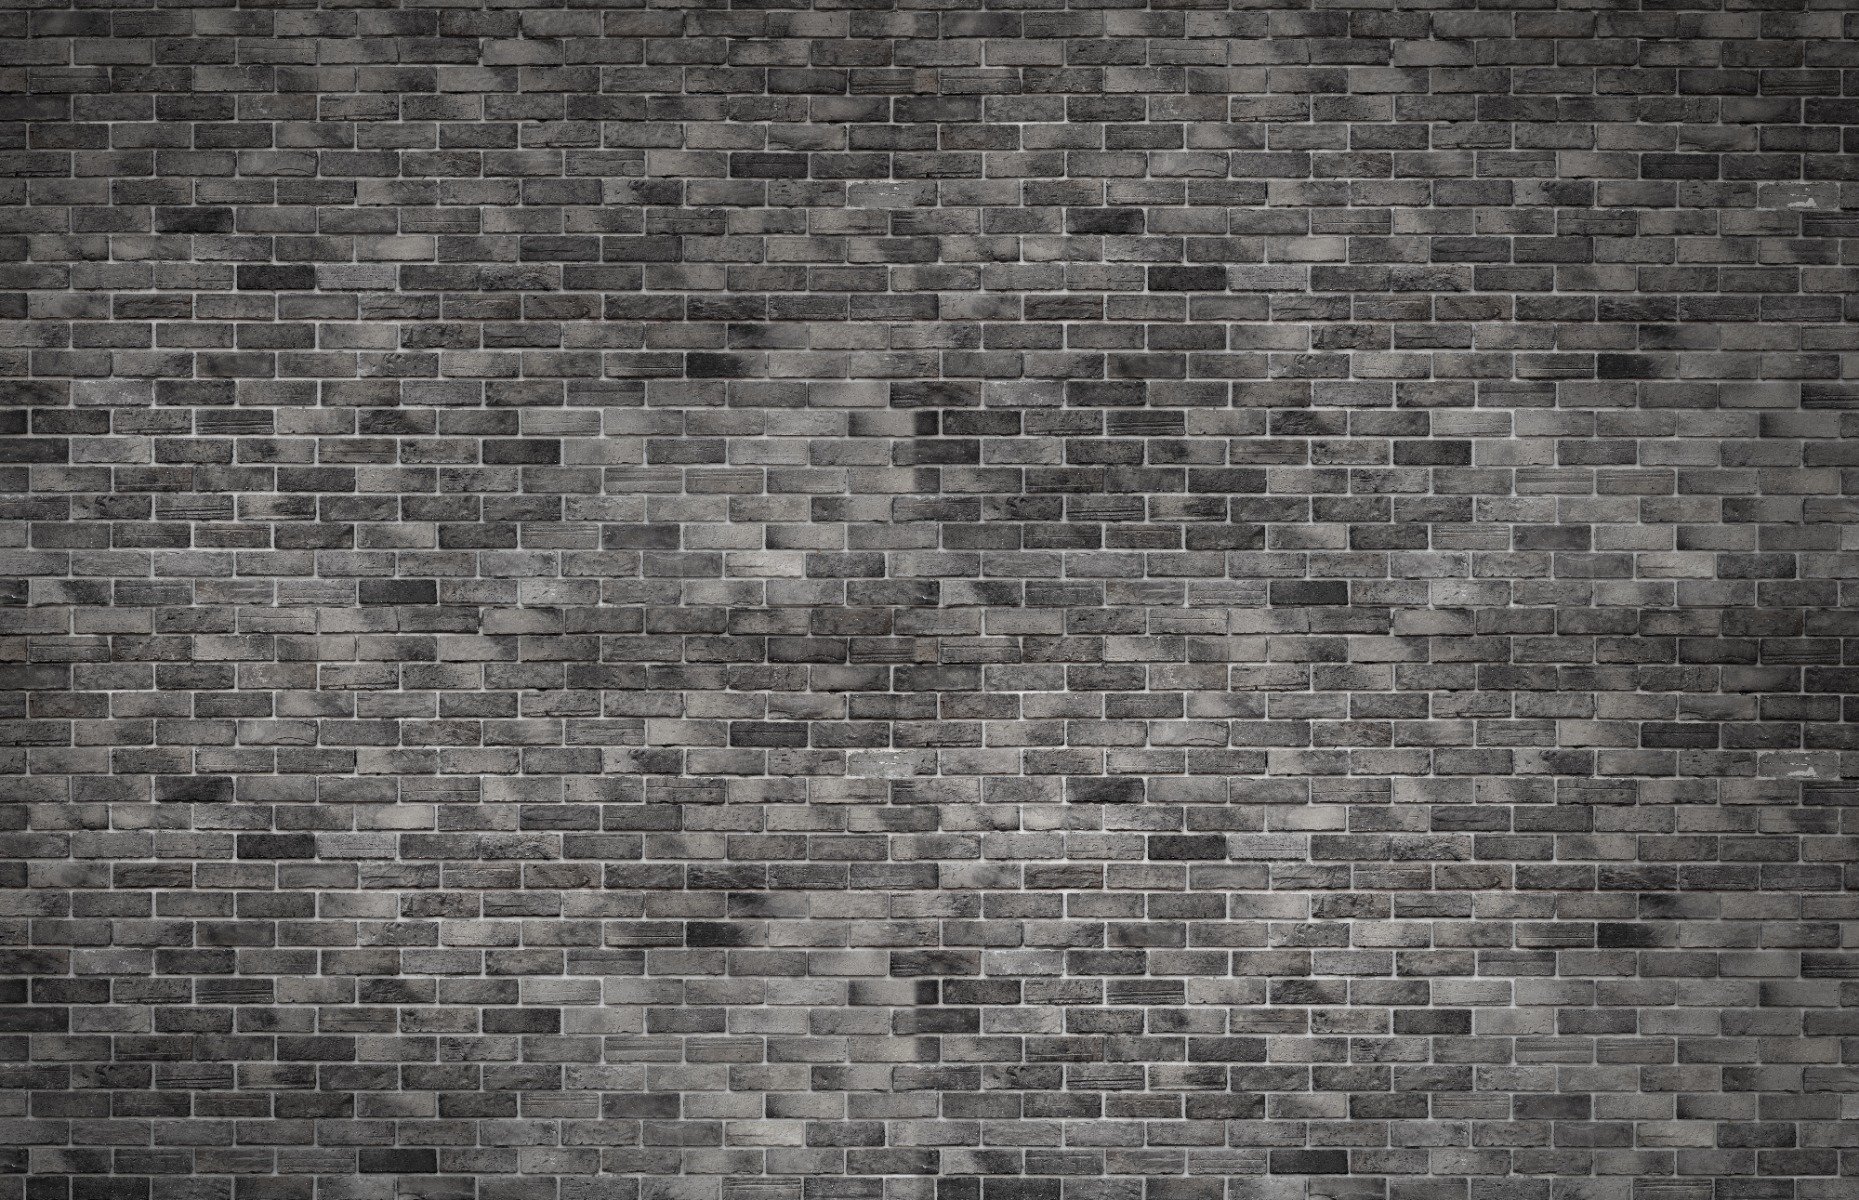 Wall Brick Building Gray Mottled Background Wallpaper Image For Free  Download  Pngtree